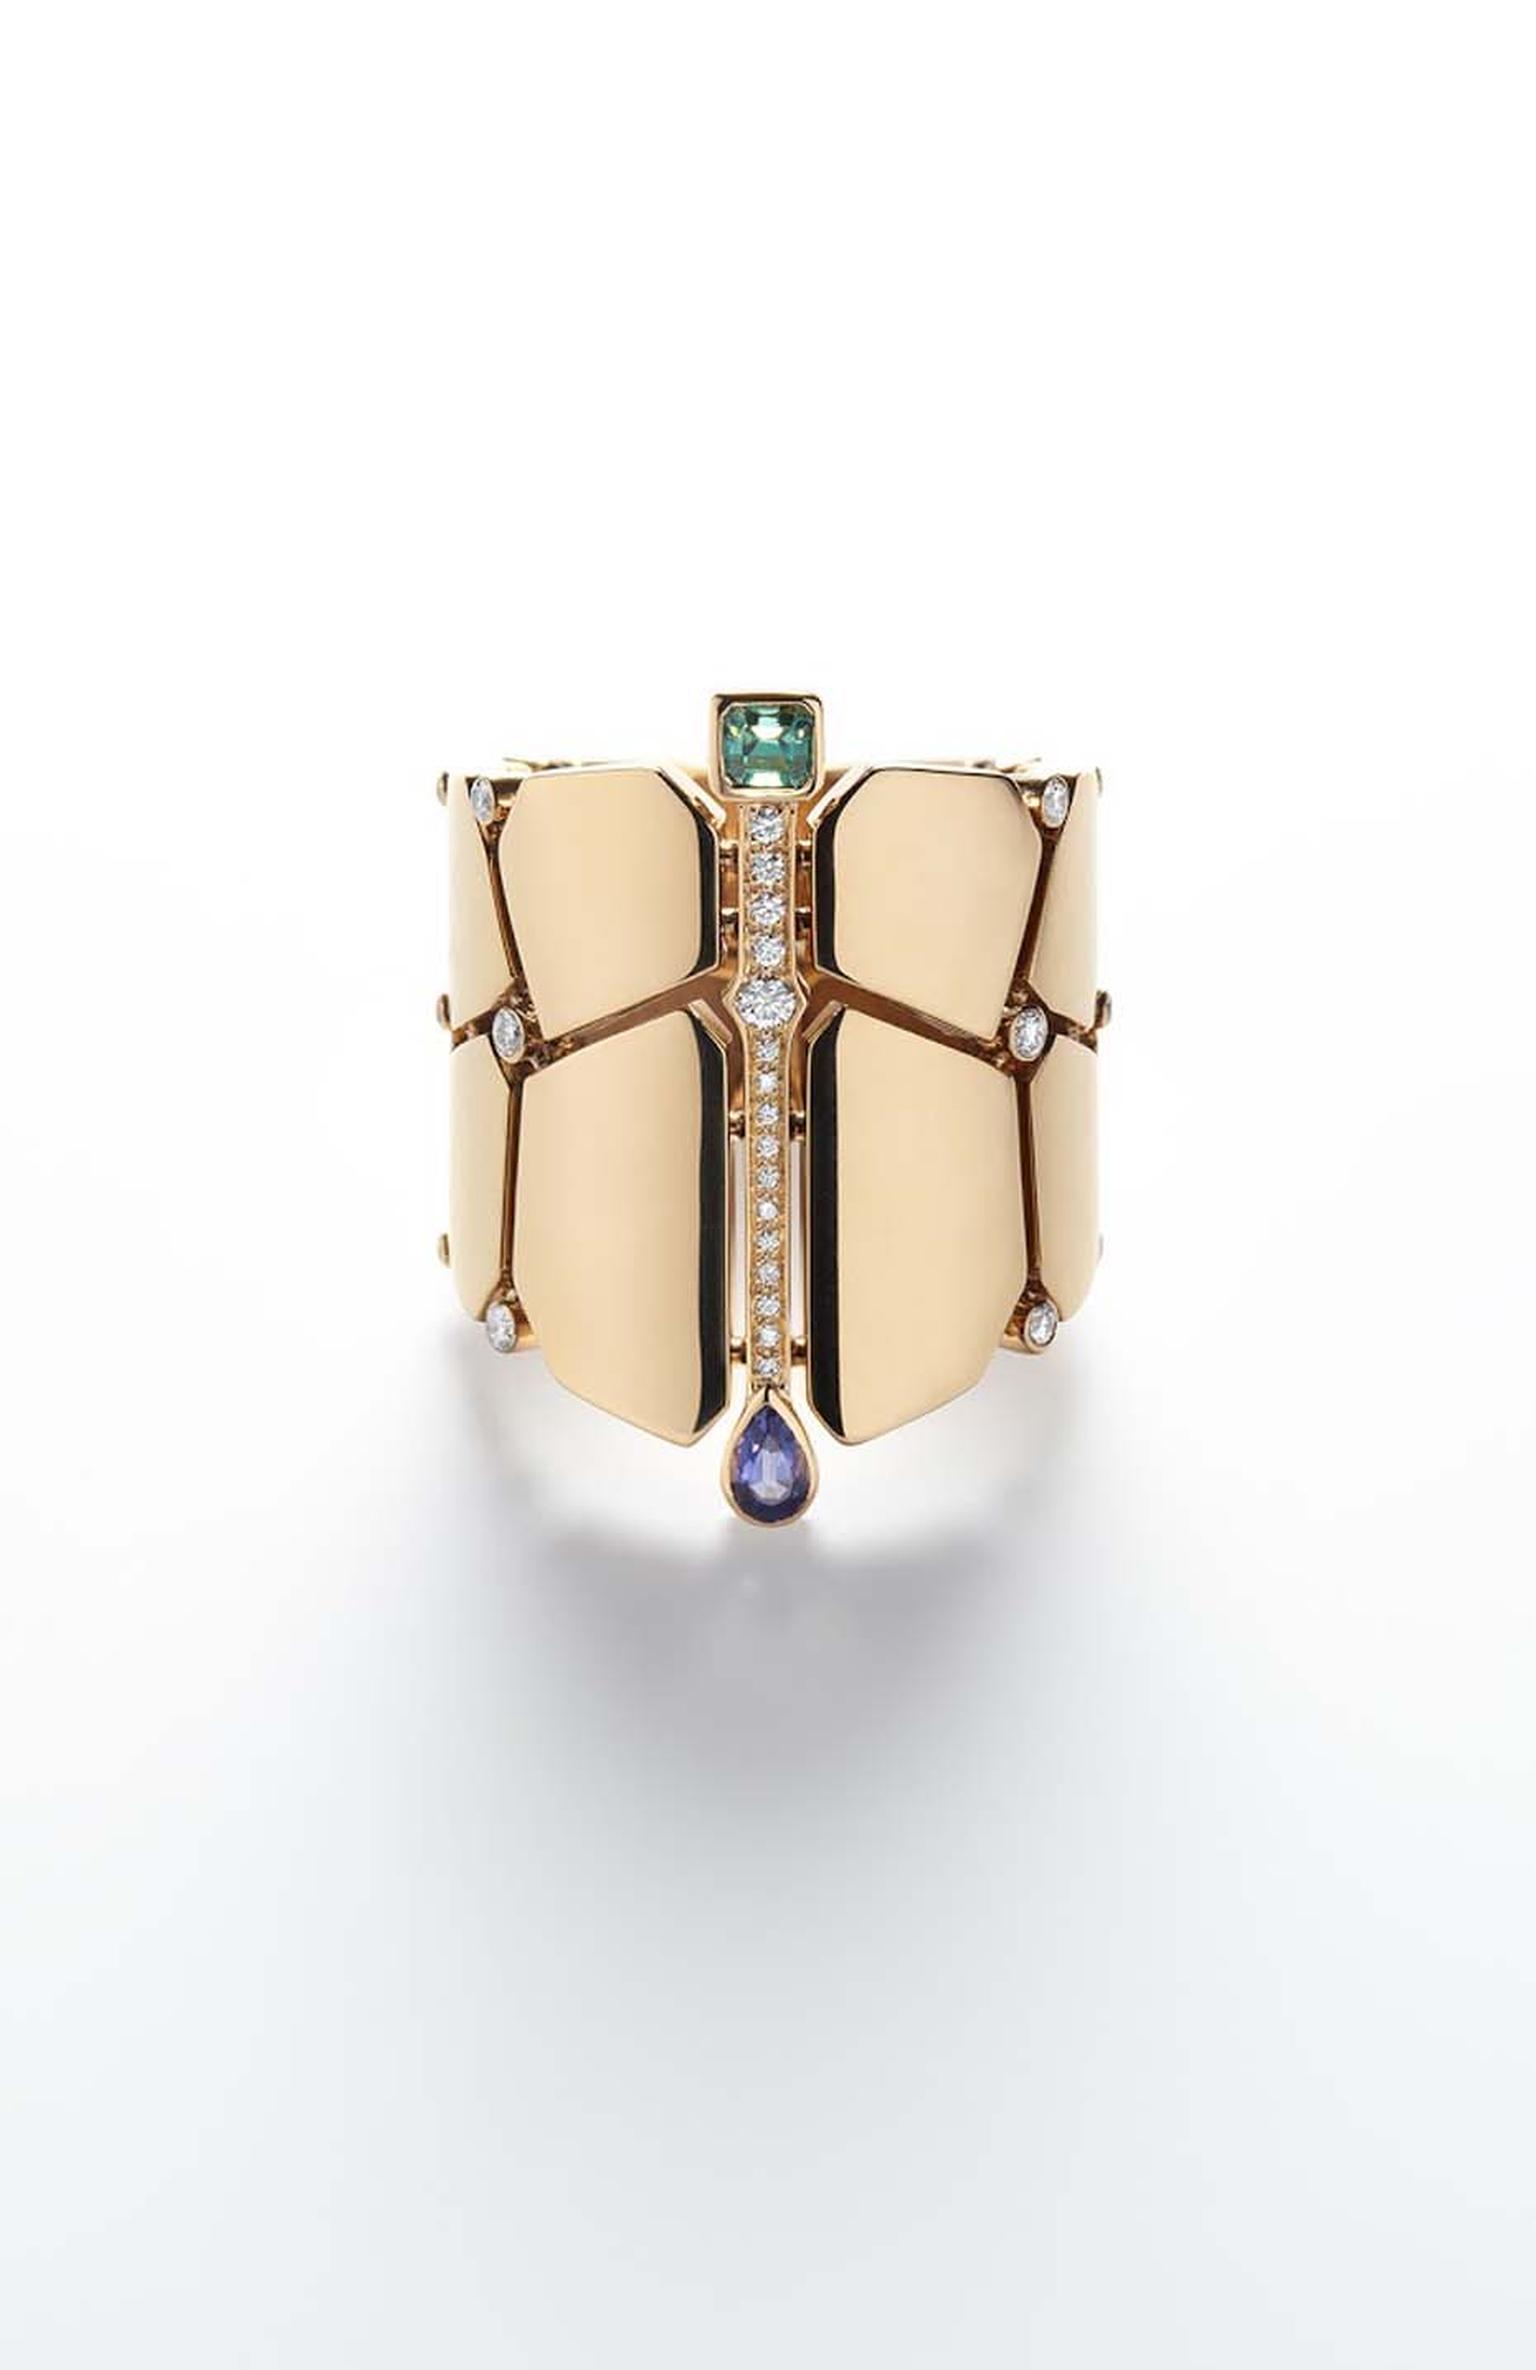 Hermès Niloticus rose gold cuff featuring a series of coloured stones including a pear-shaped iolite and a baguette-shaped beryl as well as brilliant-cut diamonds